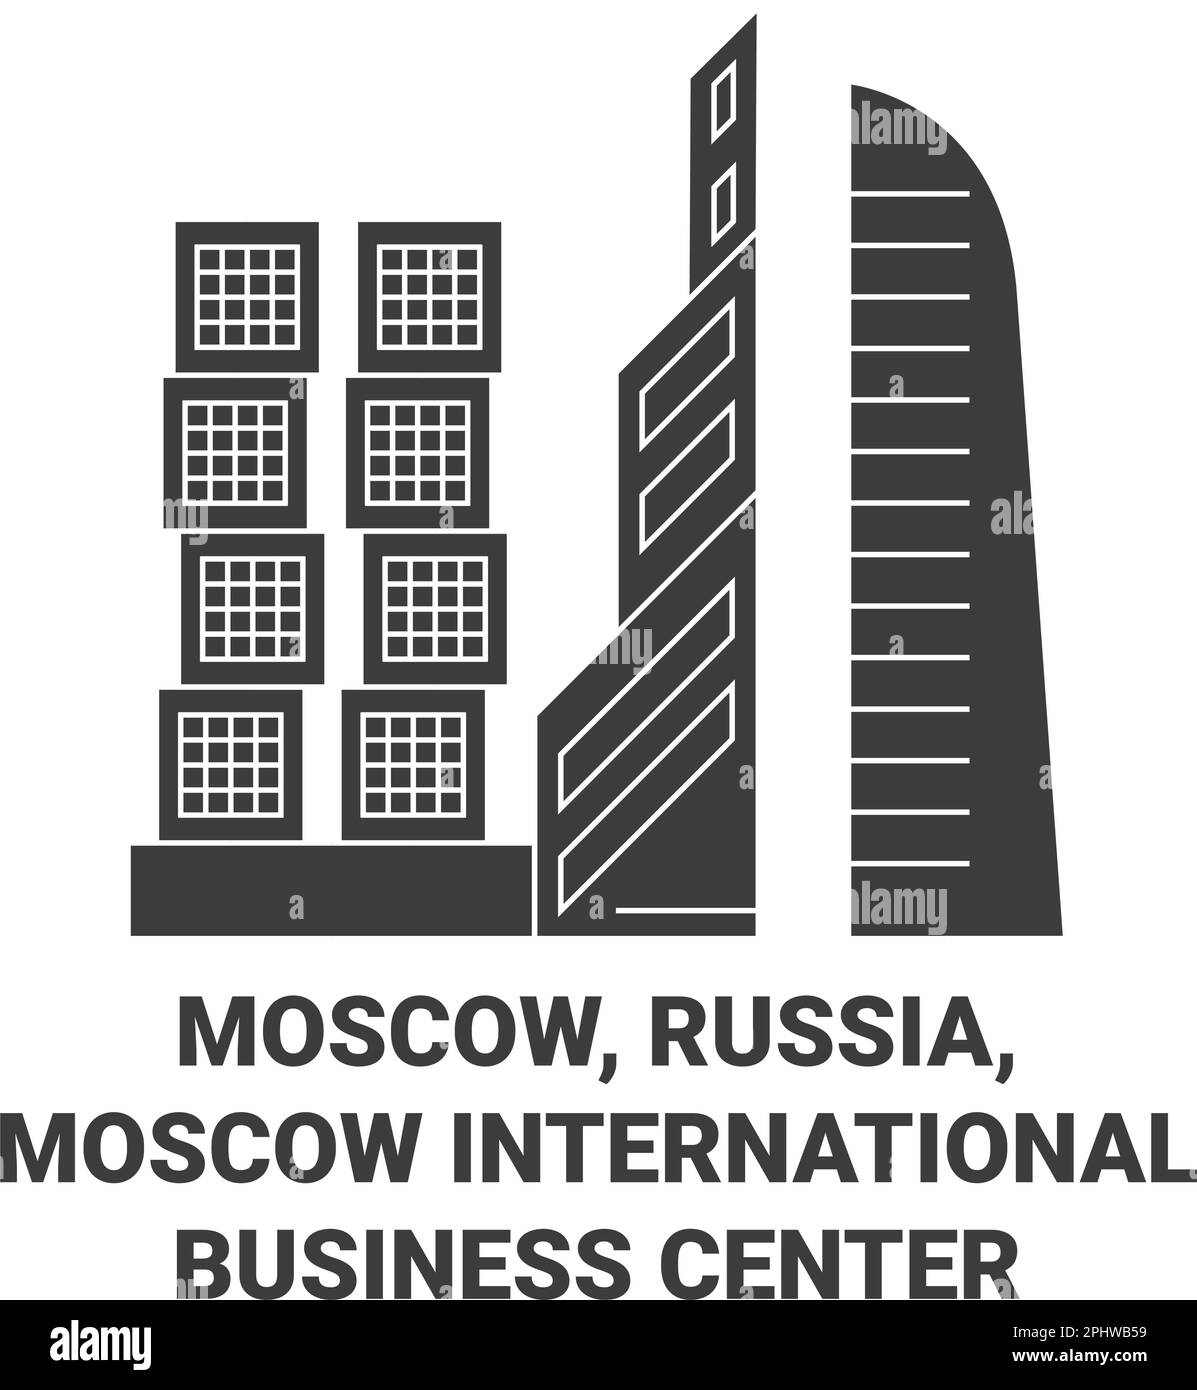 Russia, Moscow, Moscow International Business Center travel landmark vector illustration Stock Vector